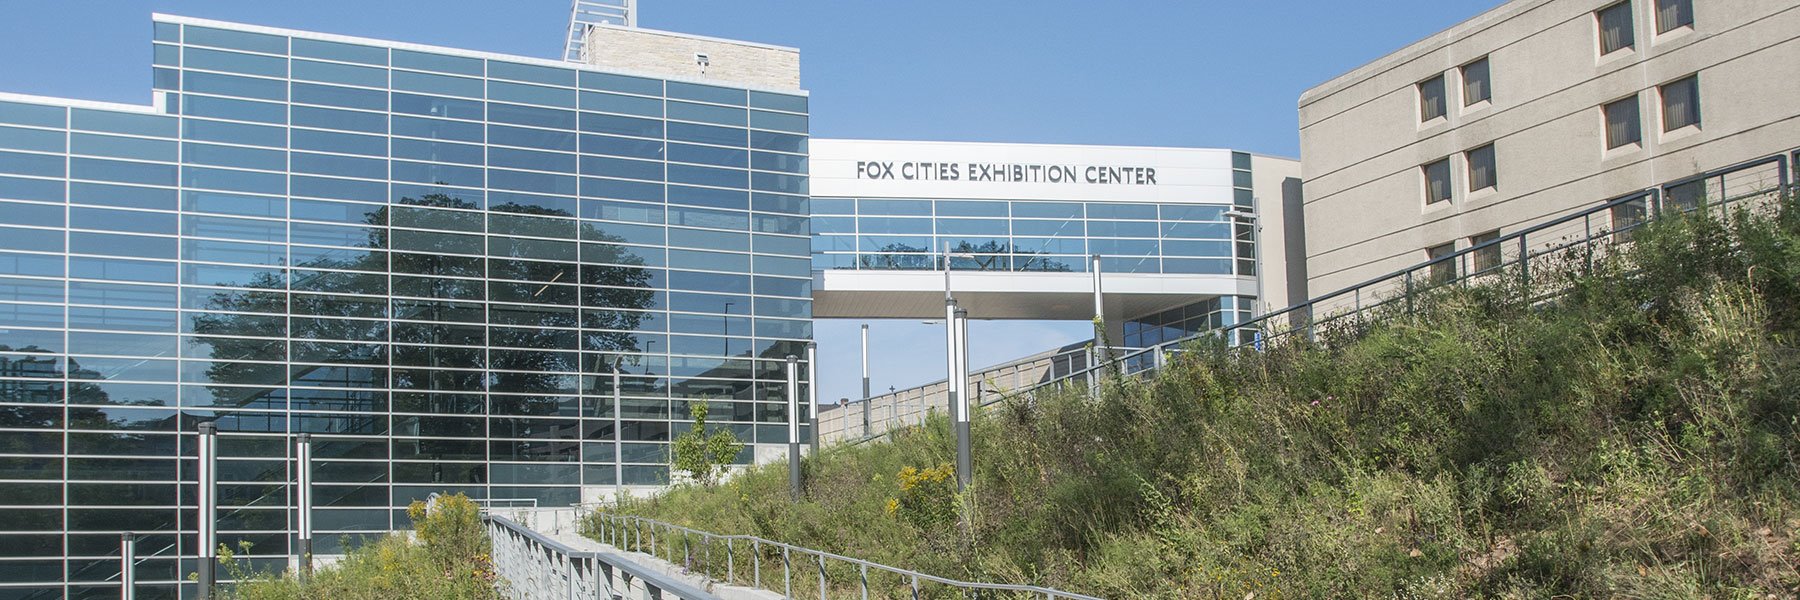 Why Choose Fox Cities Exhibition Center of Appleton, Wisconsin